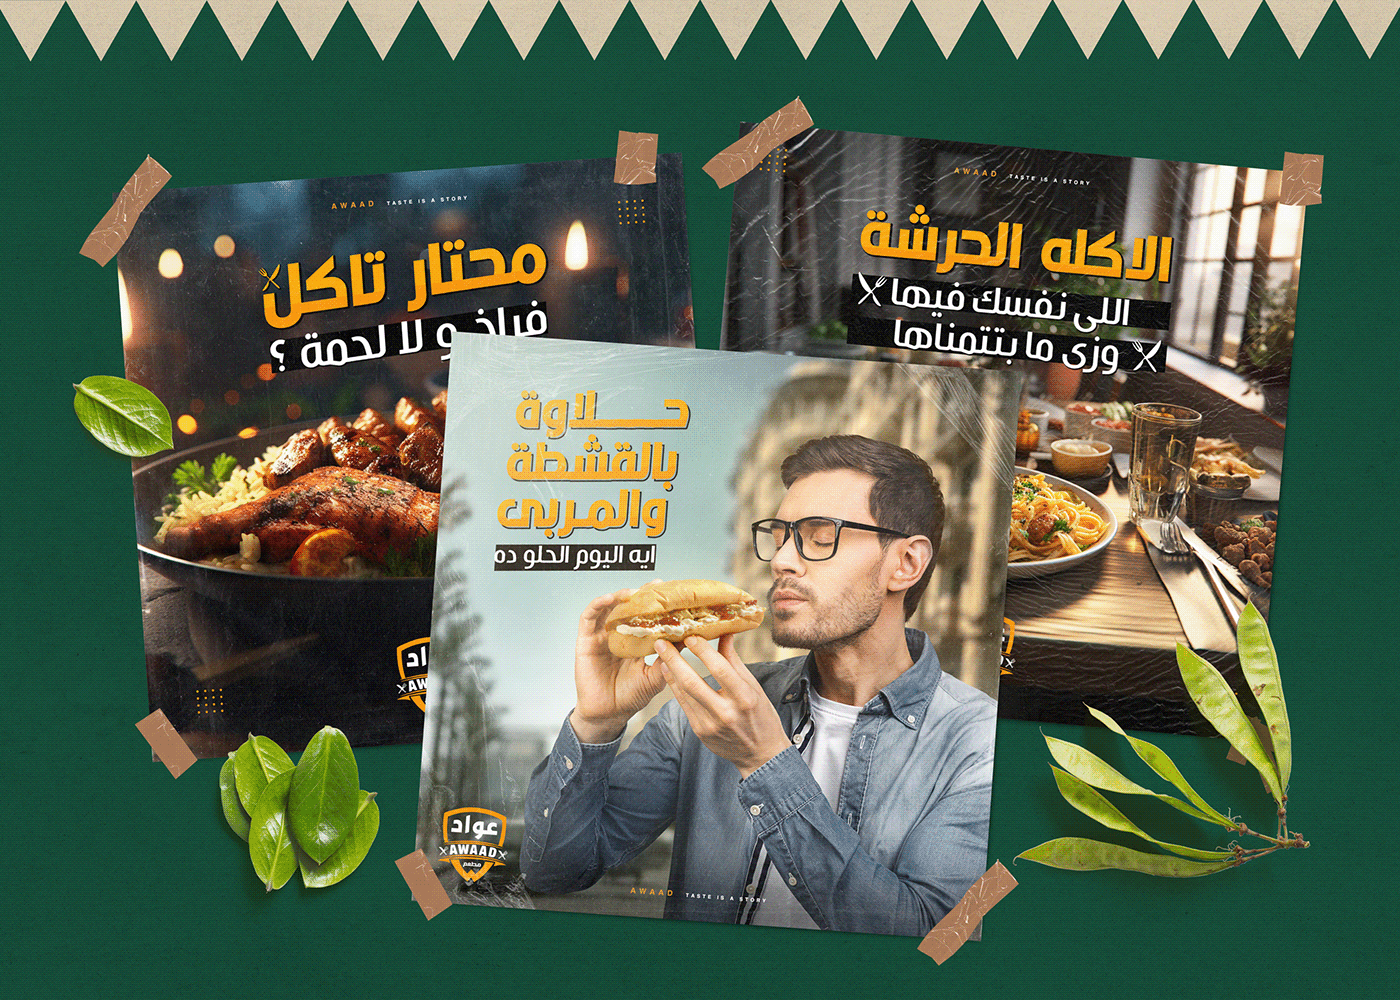 a man eating a hot dog in front of a book cover with arabic writing on it and a green background; in